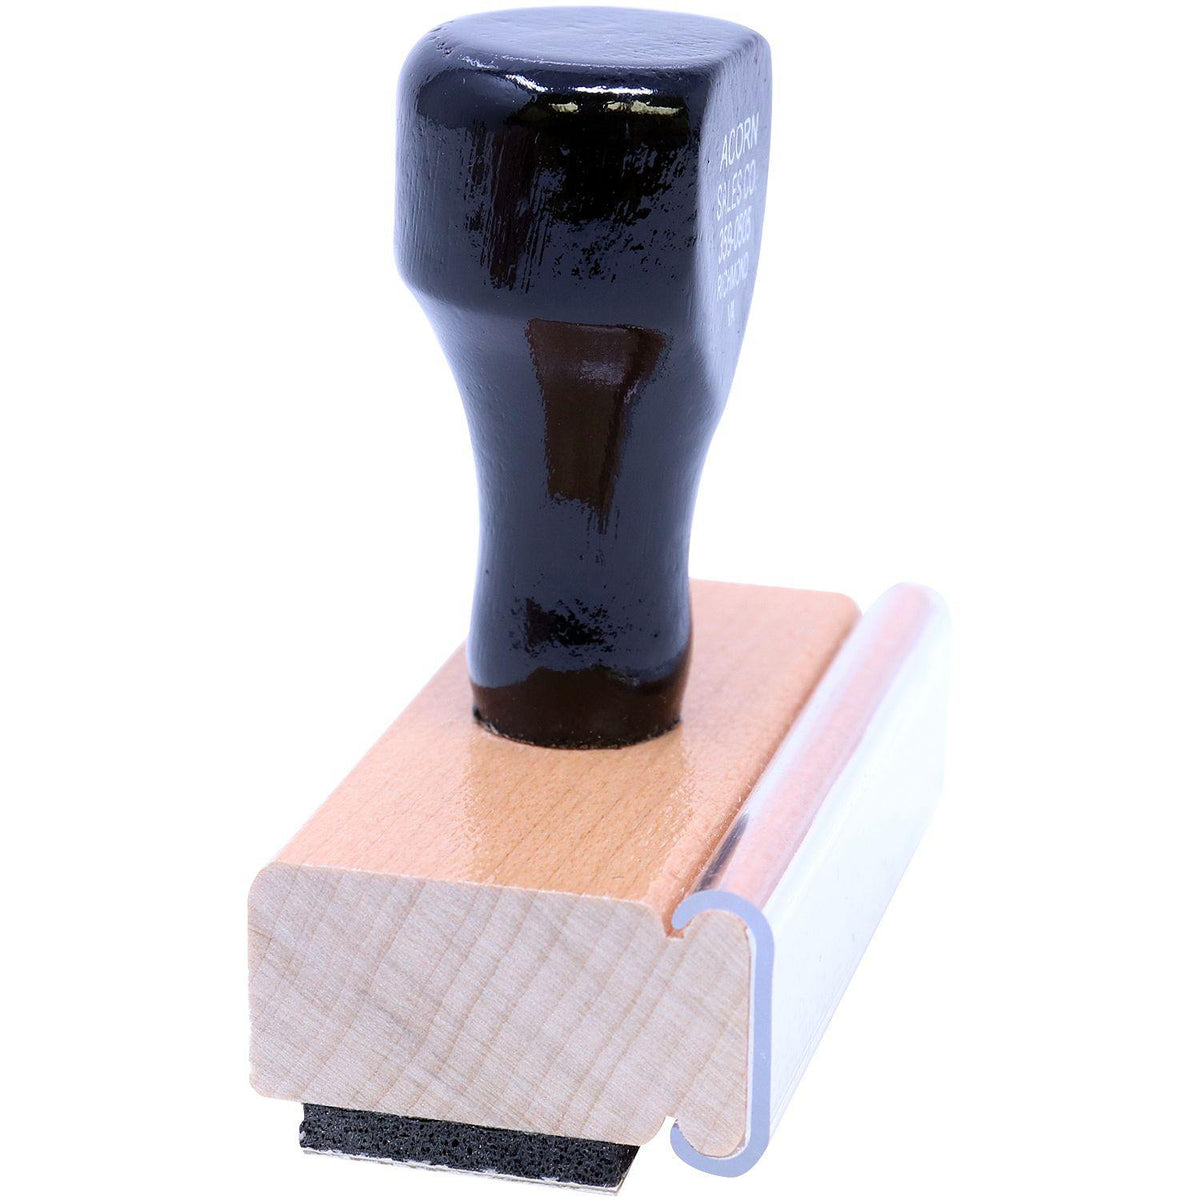 Side View of Atencion Inmediata Rubber Stamp at an Angle